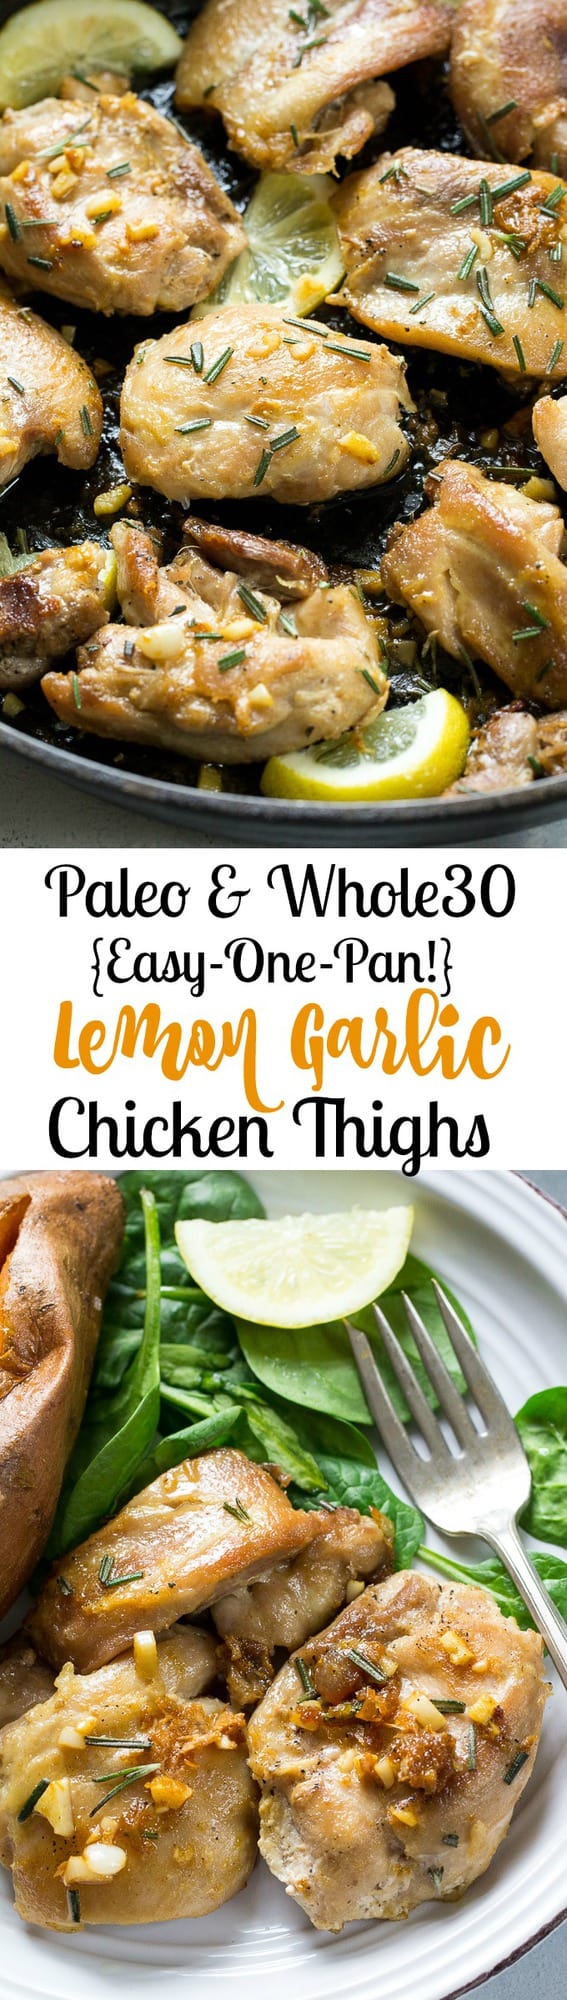 Easy Paleo and Whole30 Lemon Garlic Chicken Thighs made all in one pan that are super flavorful, filling and even kid friendly! Great Paleo and Whole30 family weeknight dinner